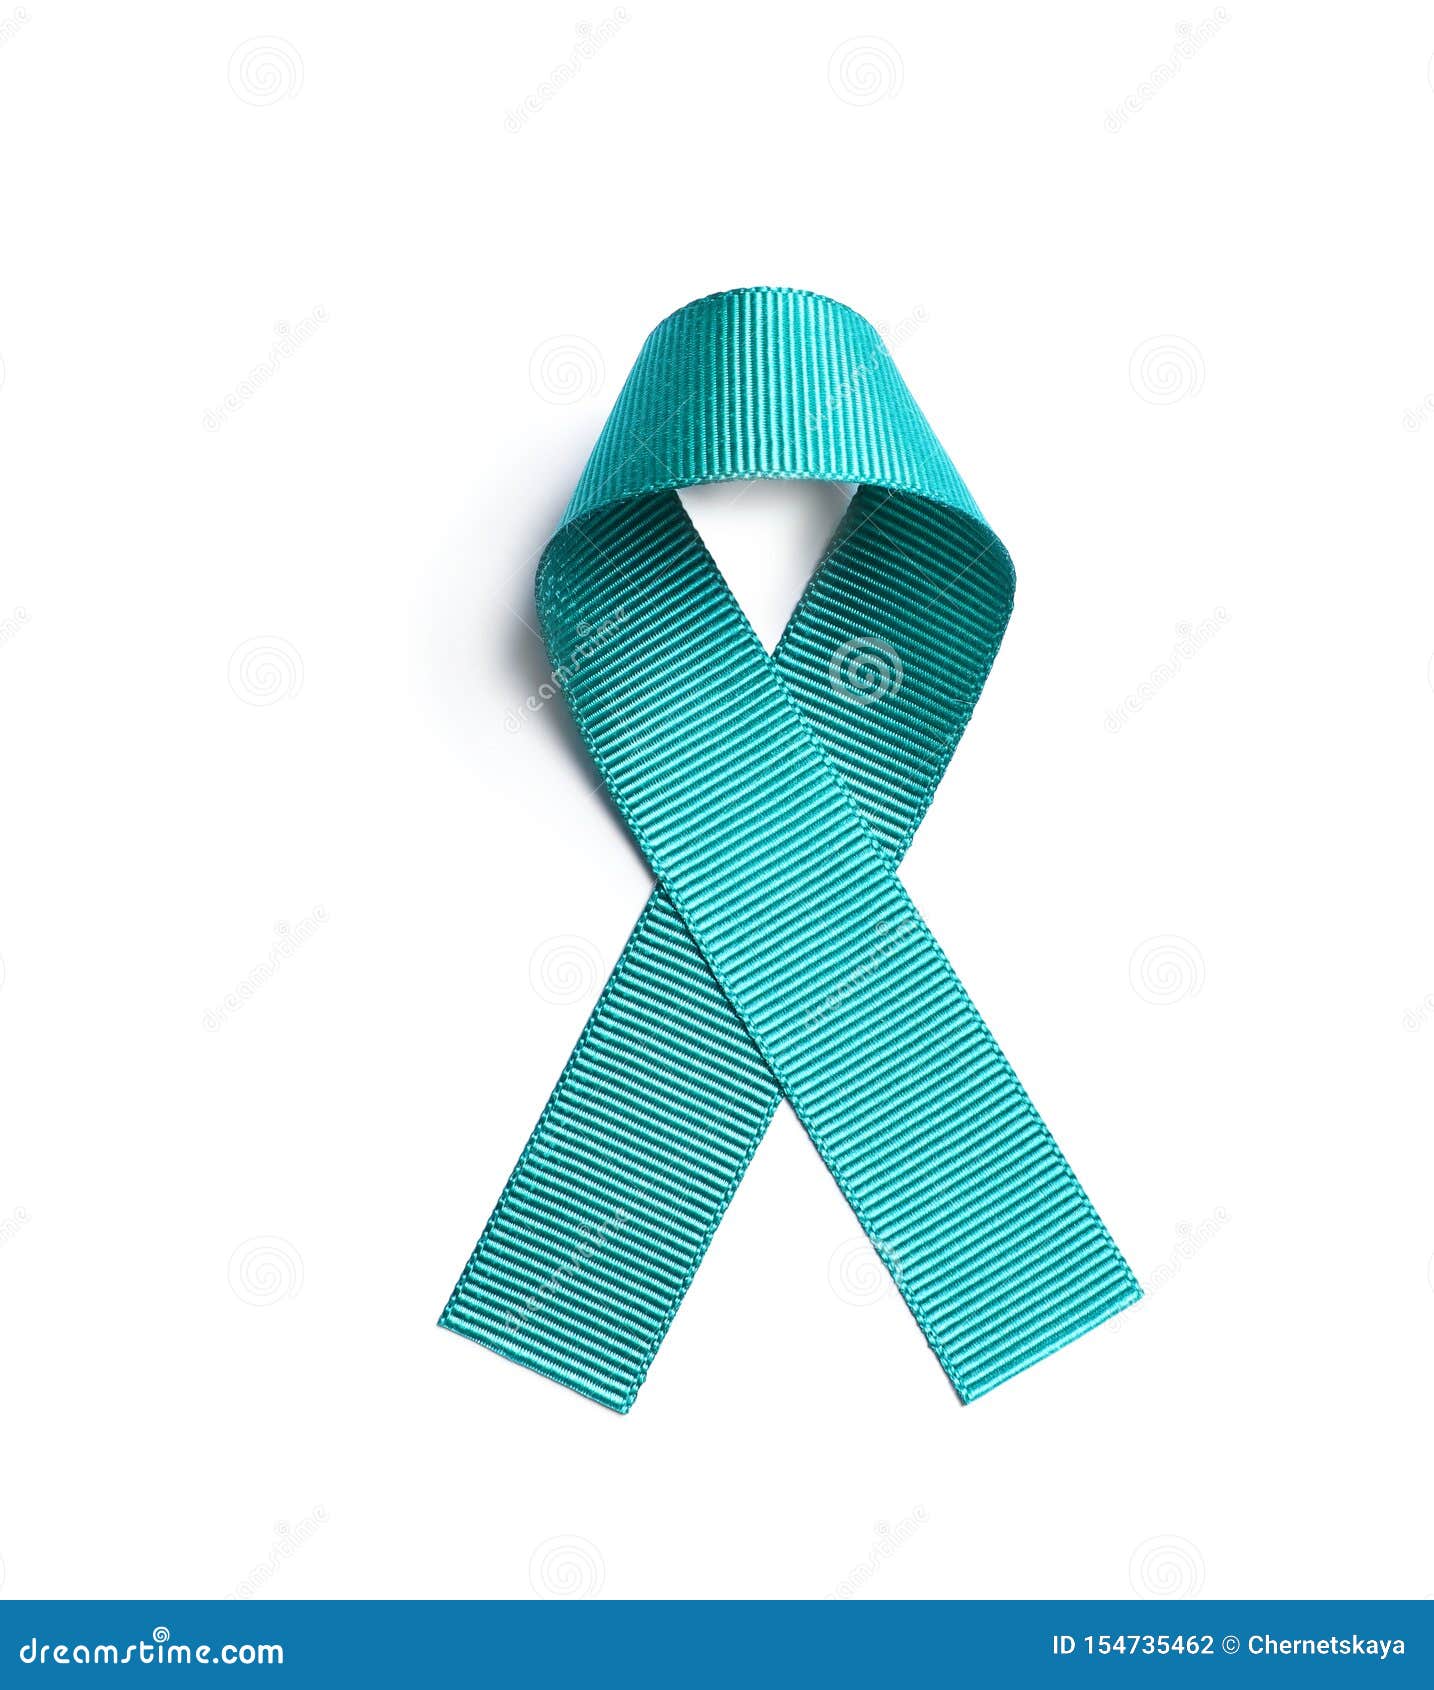 teal awareness ribbon on white background, top view.  of social and medical